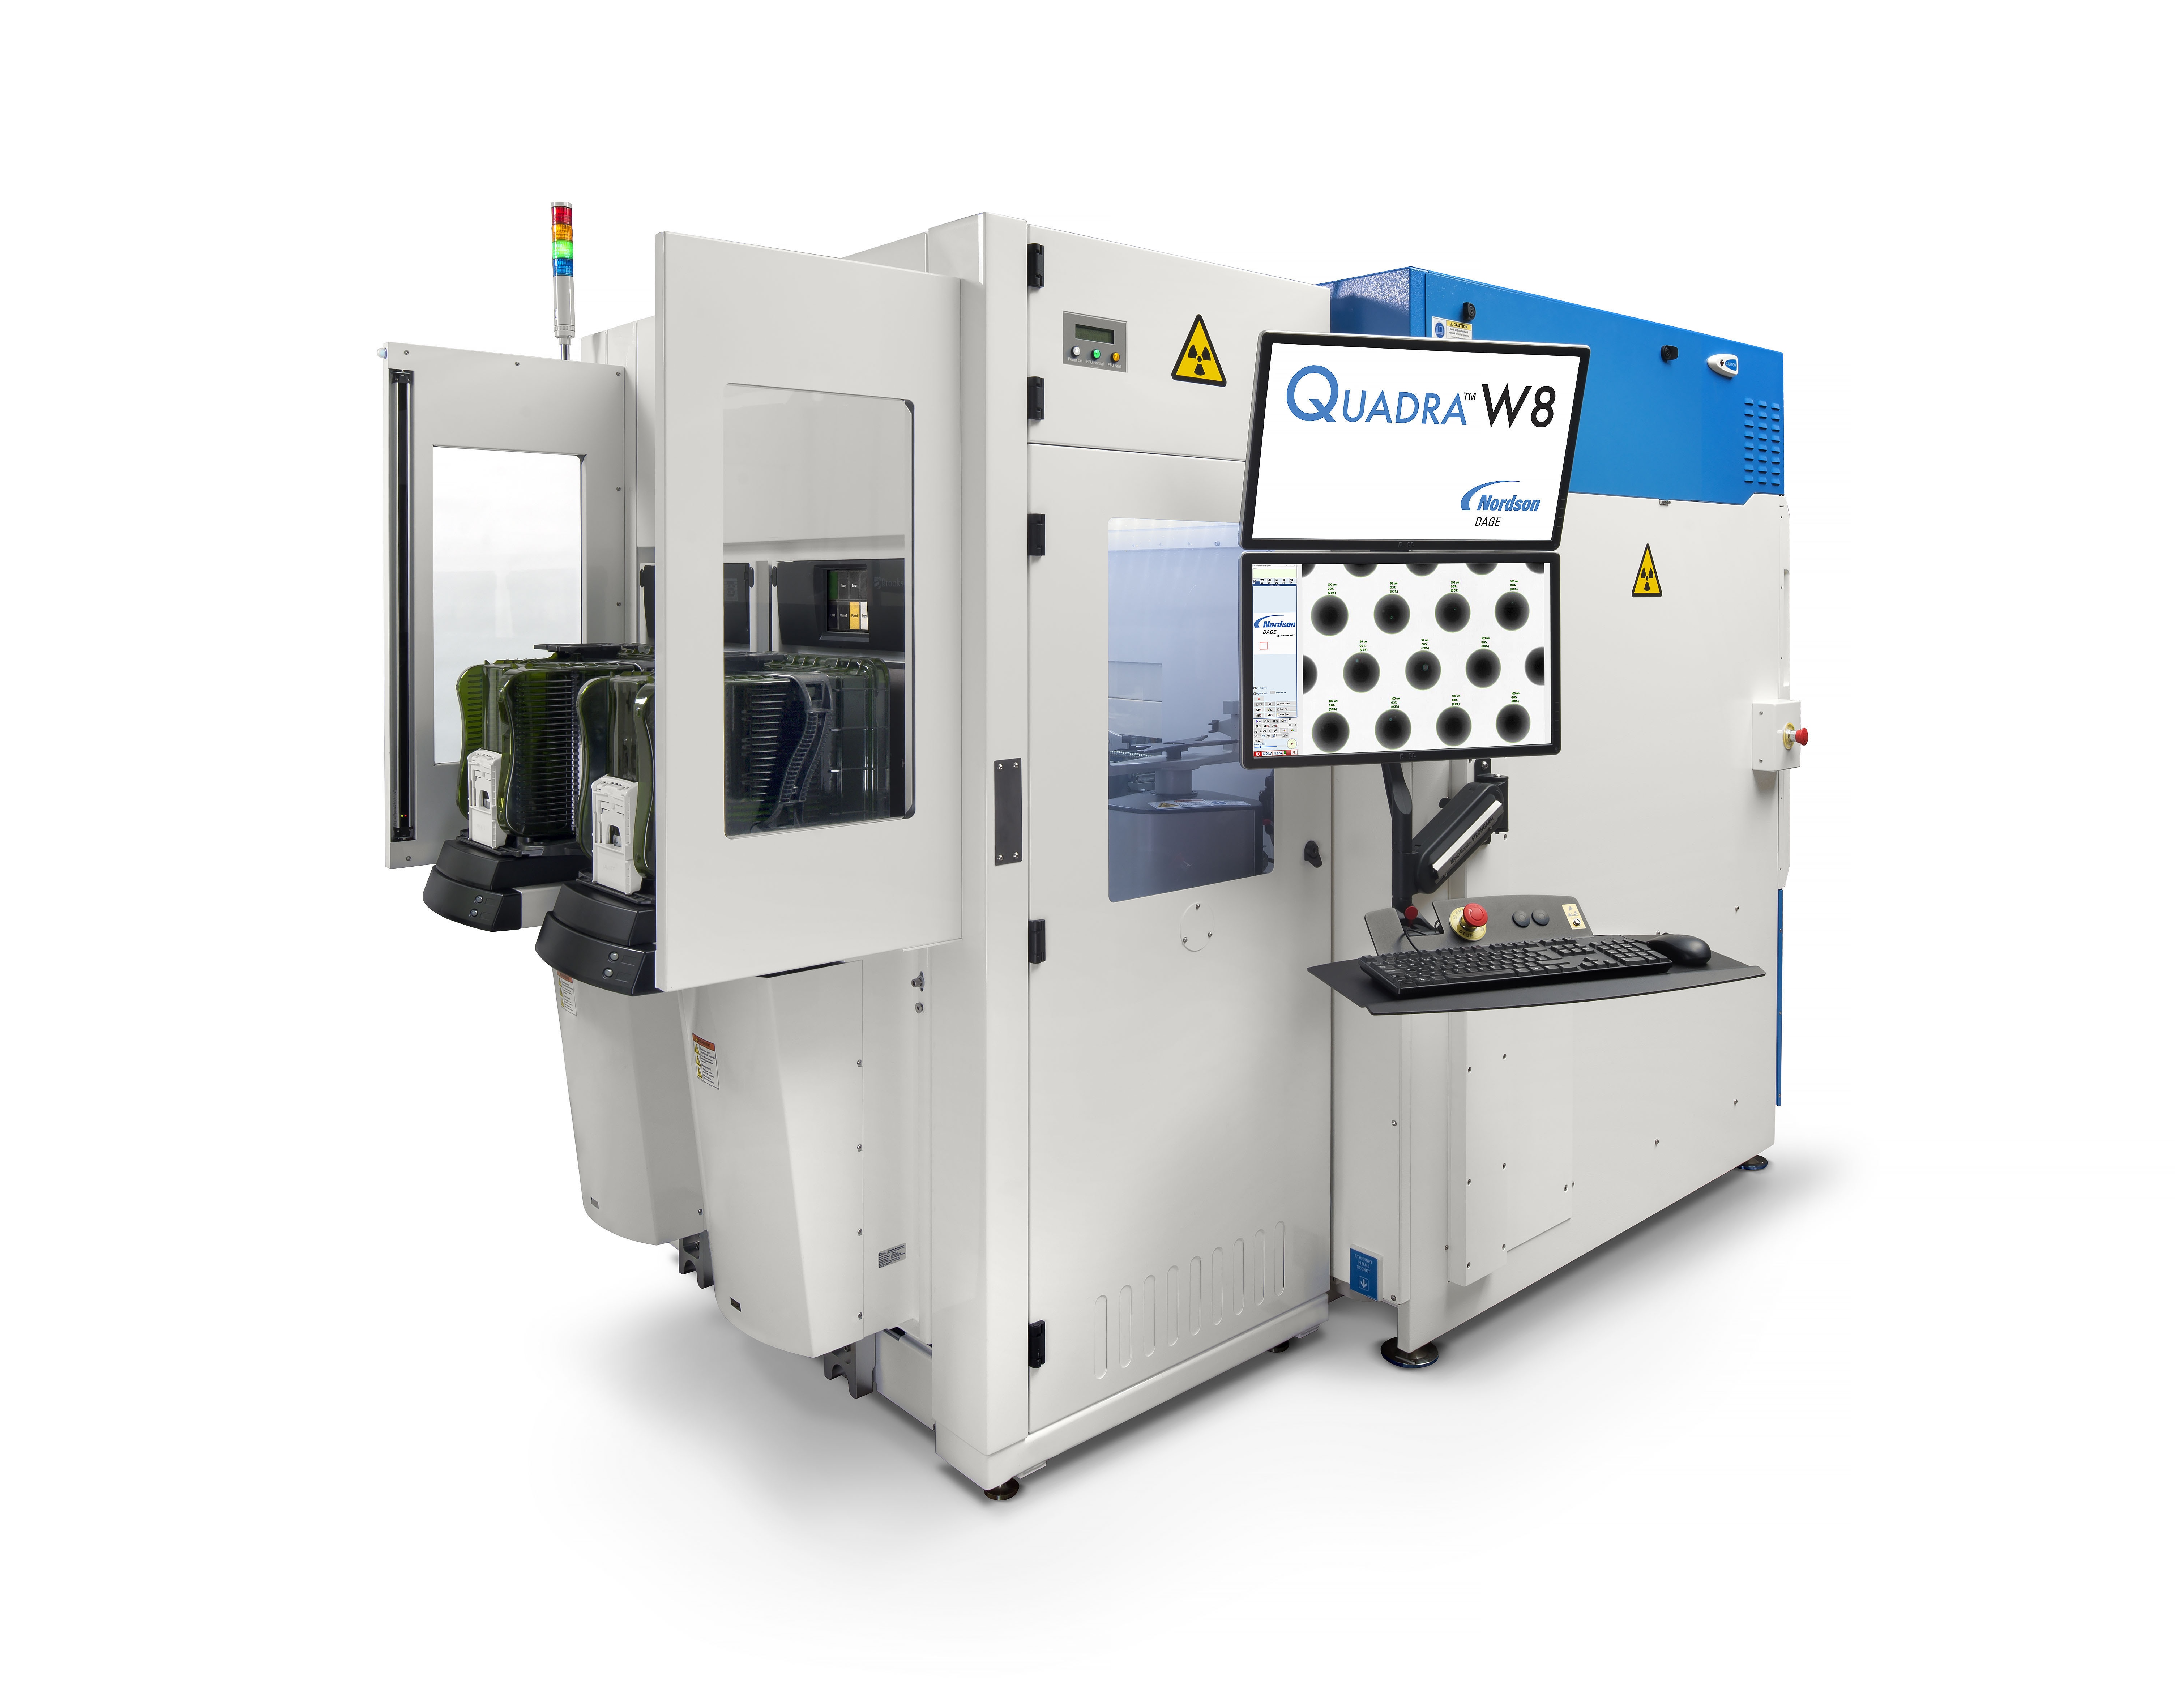 Inspect Wafers Straight from the FOUP with the New Nordson DAGE Quadra® W8 Automated Wafer X-Ray Inspection System